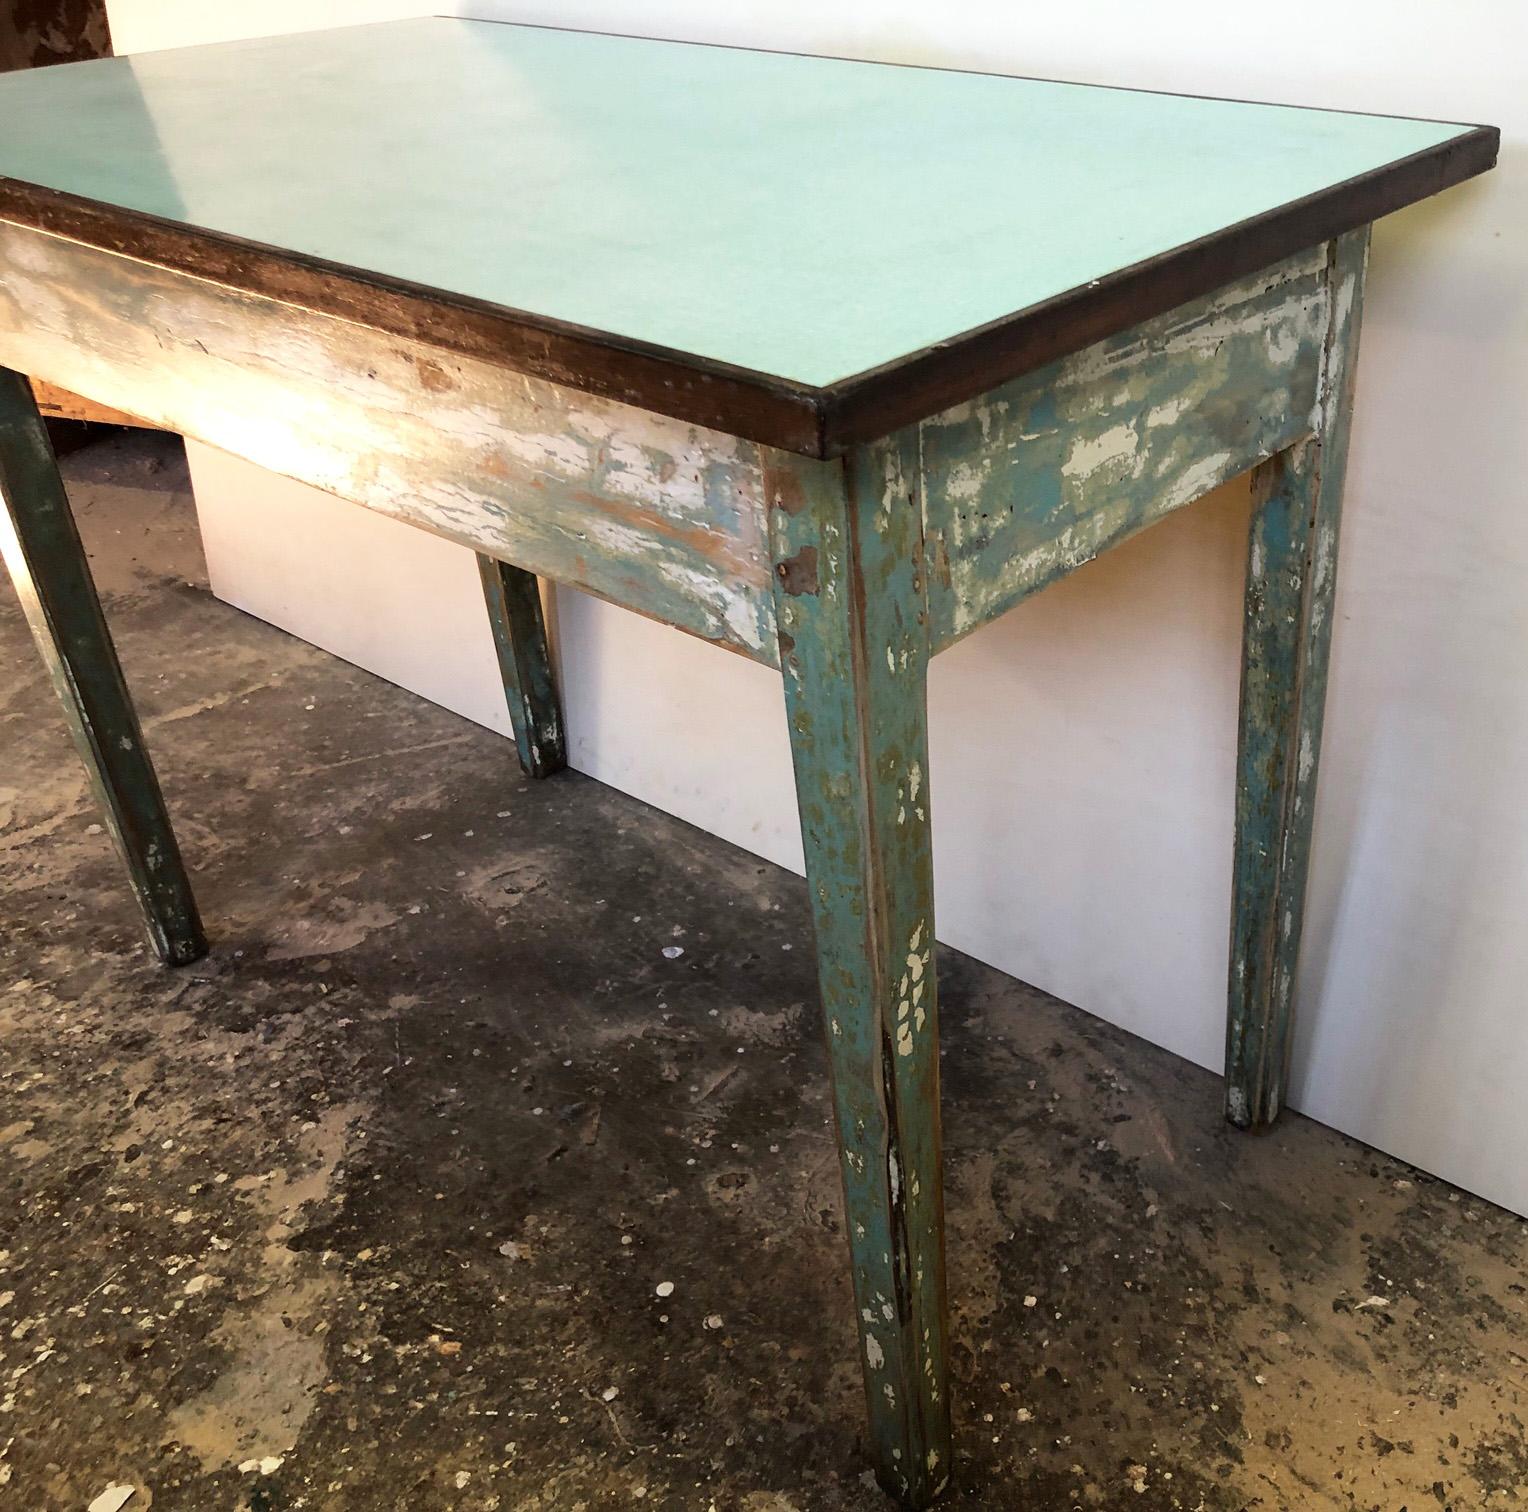 Mid-Century Modern Table from 1950 Original Tuscan Green White Shaded, with Top in Formica on Fir